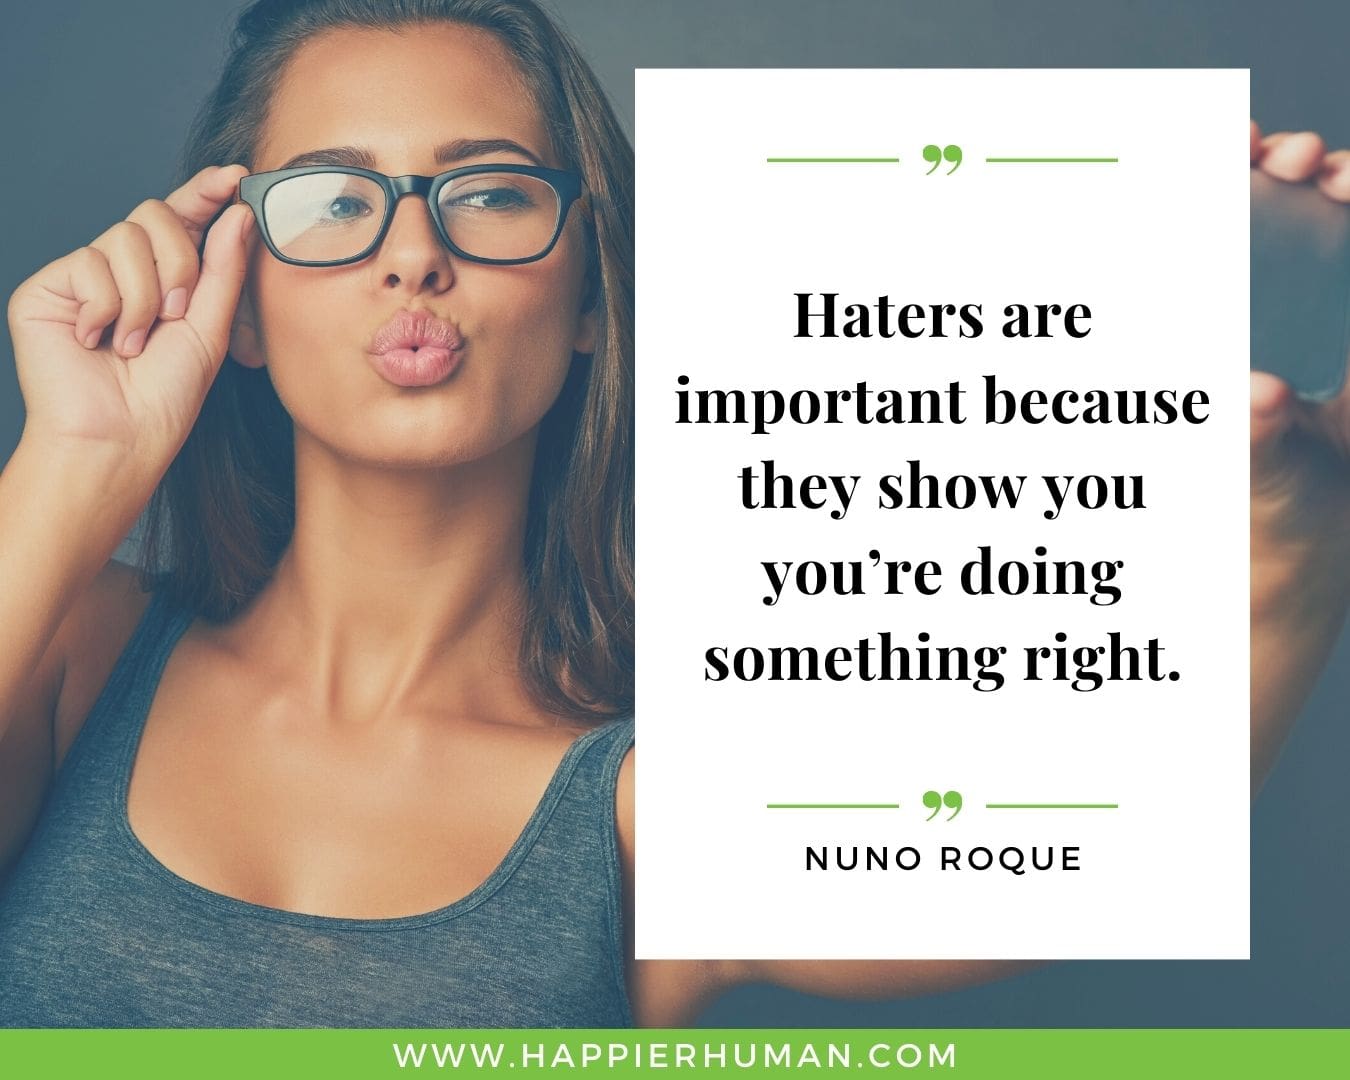 Haters Quotes - “Haters are important because they show you you’re doing something right.“- Nuno Roque